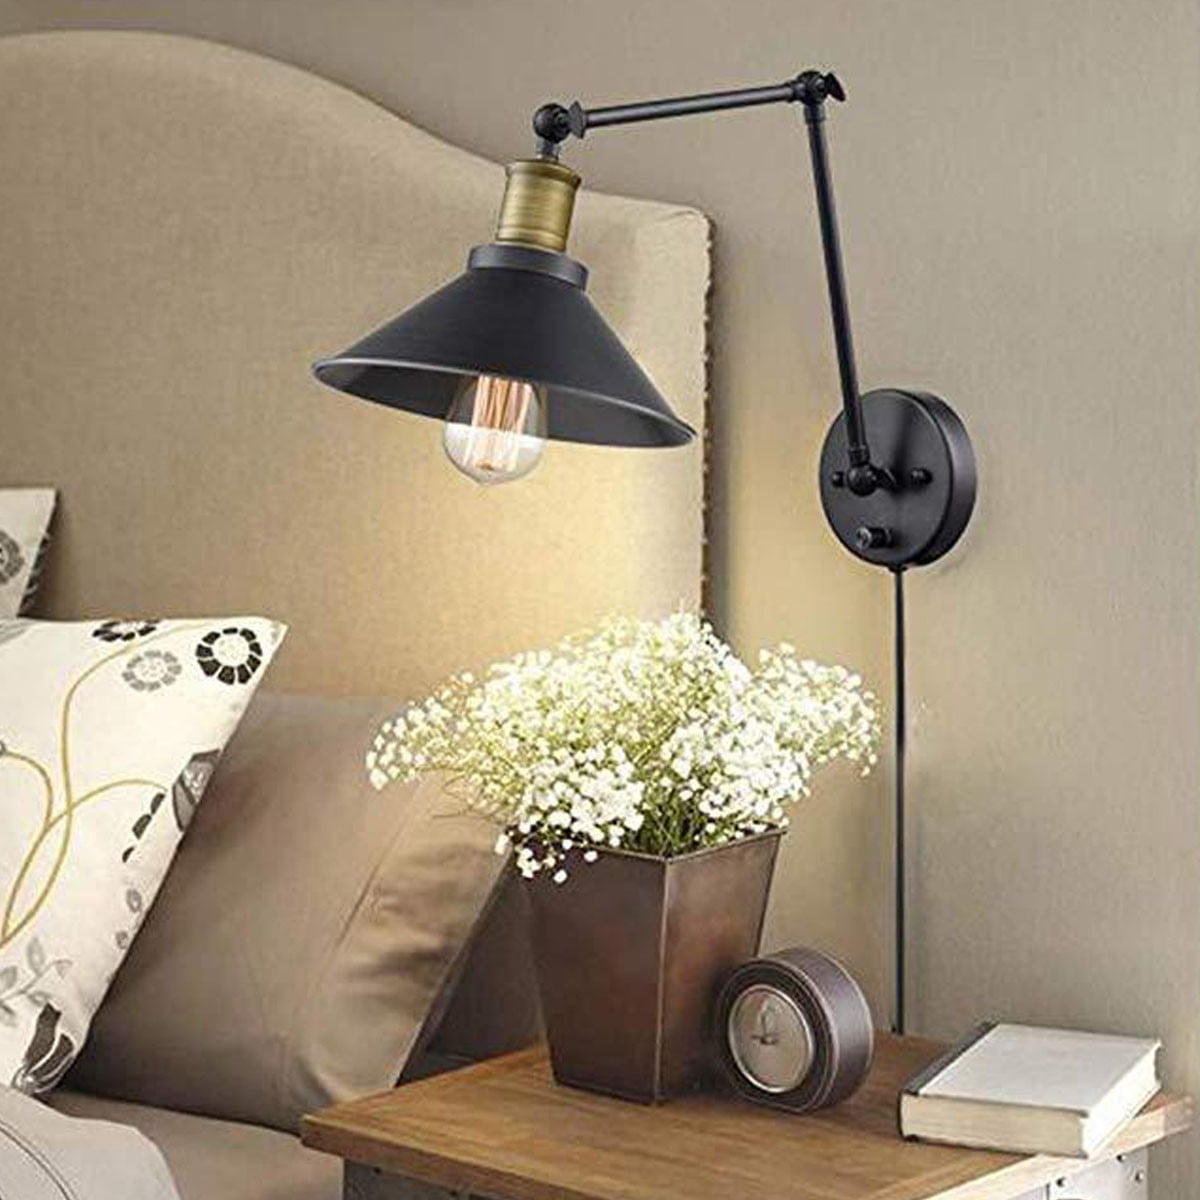 Details about   Retro Industrial Swing Arm Wall Lamp Sconce Wire Cage Wall Light Fixture Plug in 